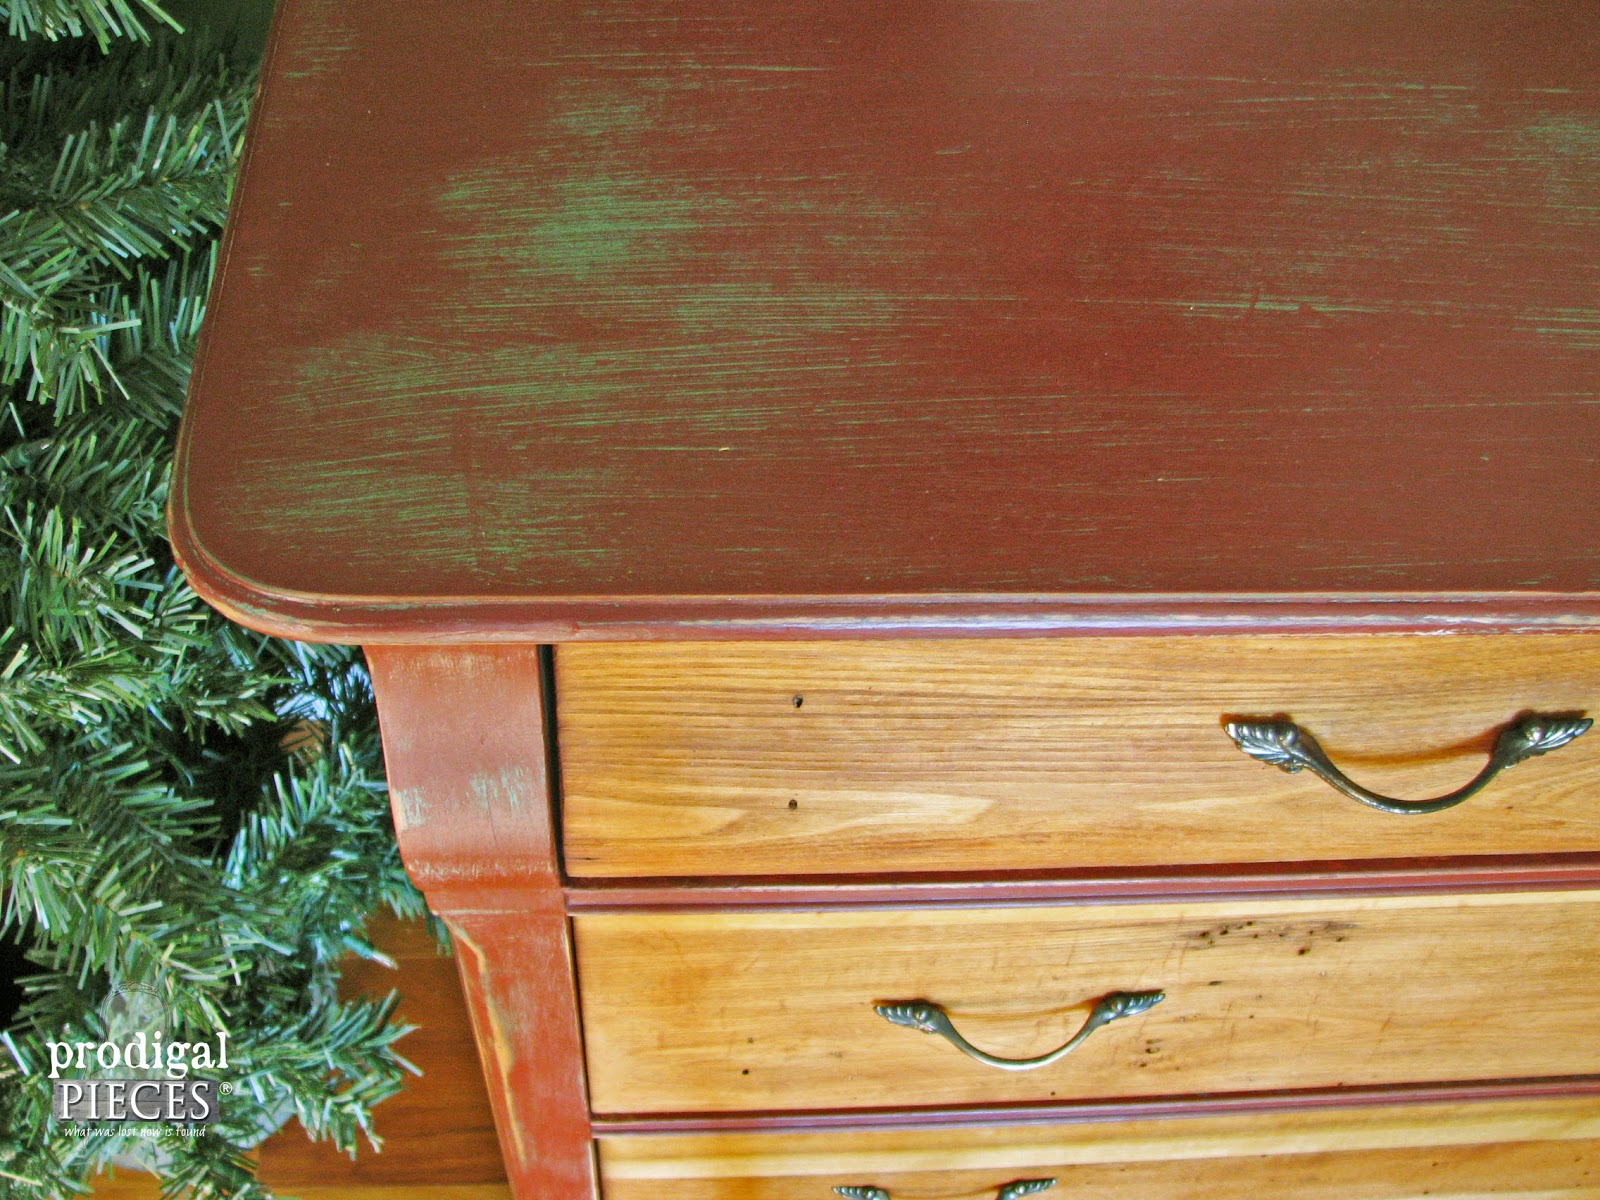 Themed Furniture Makeover Day ~ Rustic Red Farmhouse Cottage Chic Dresser by Prodigal Pieces | prodigalpieces.com